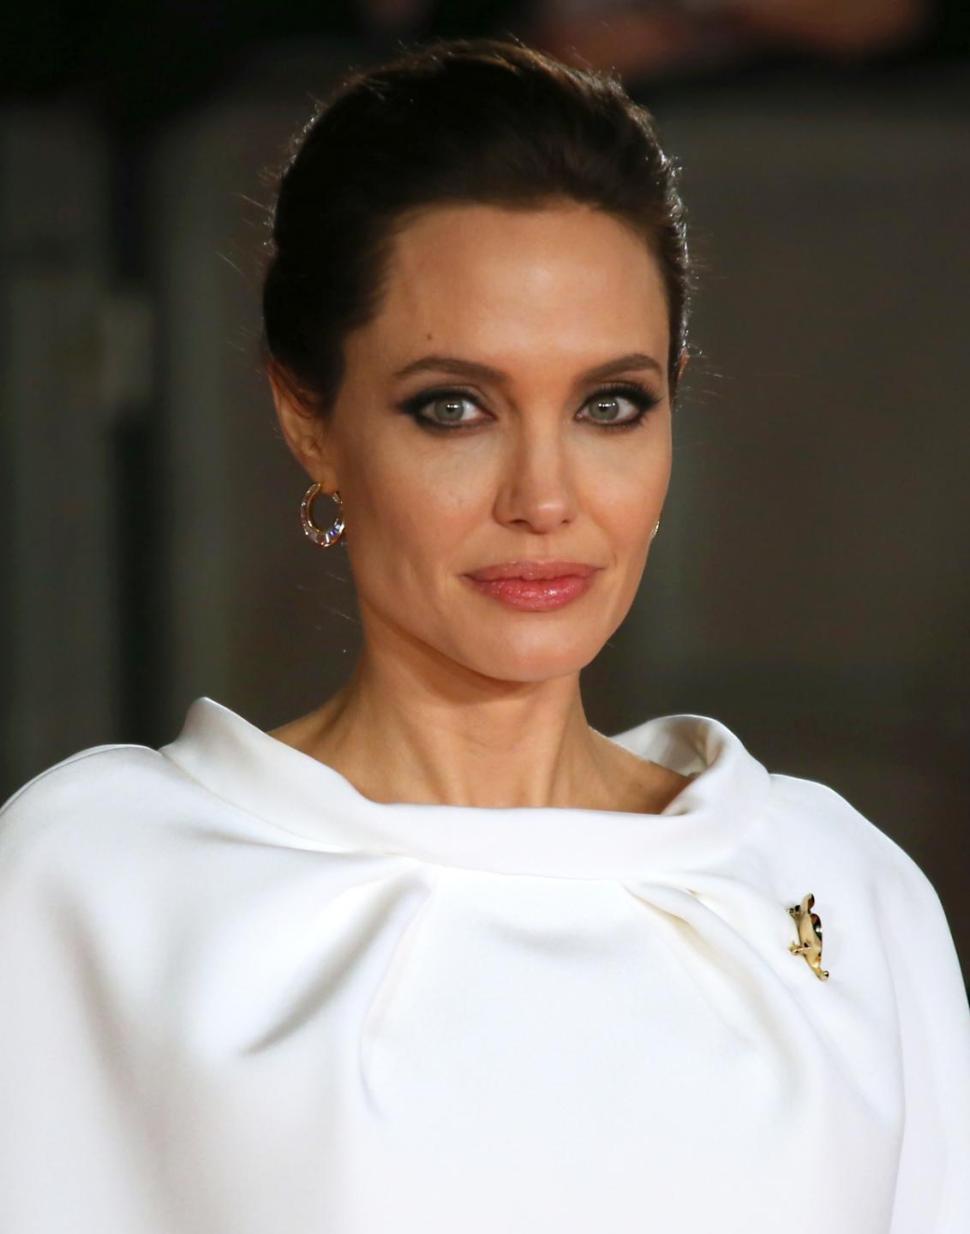 Angelina Jolie swatted away questions about Sony hack scandal from 'Today,' but interview aired unlike Amy Adams' canceled appearance. 